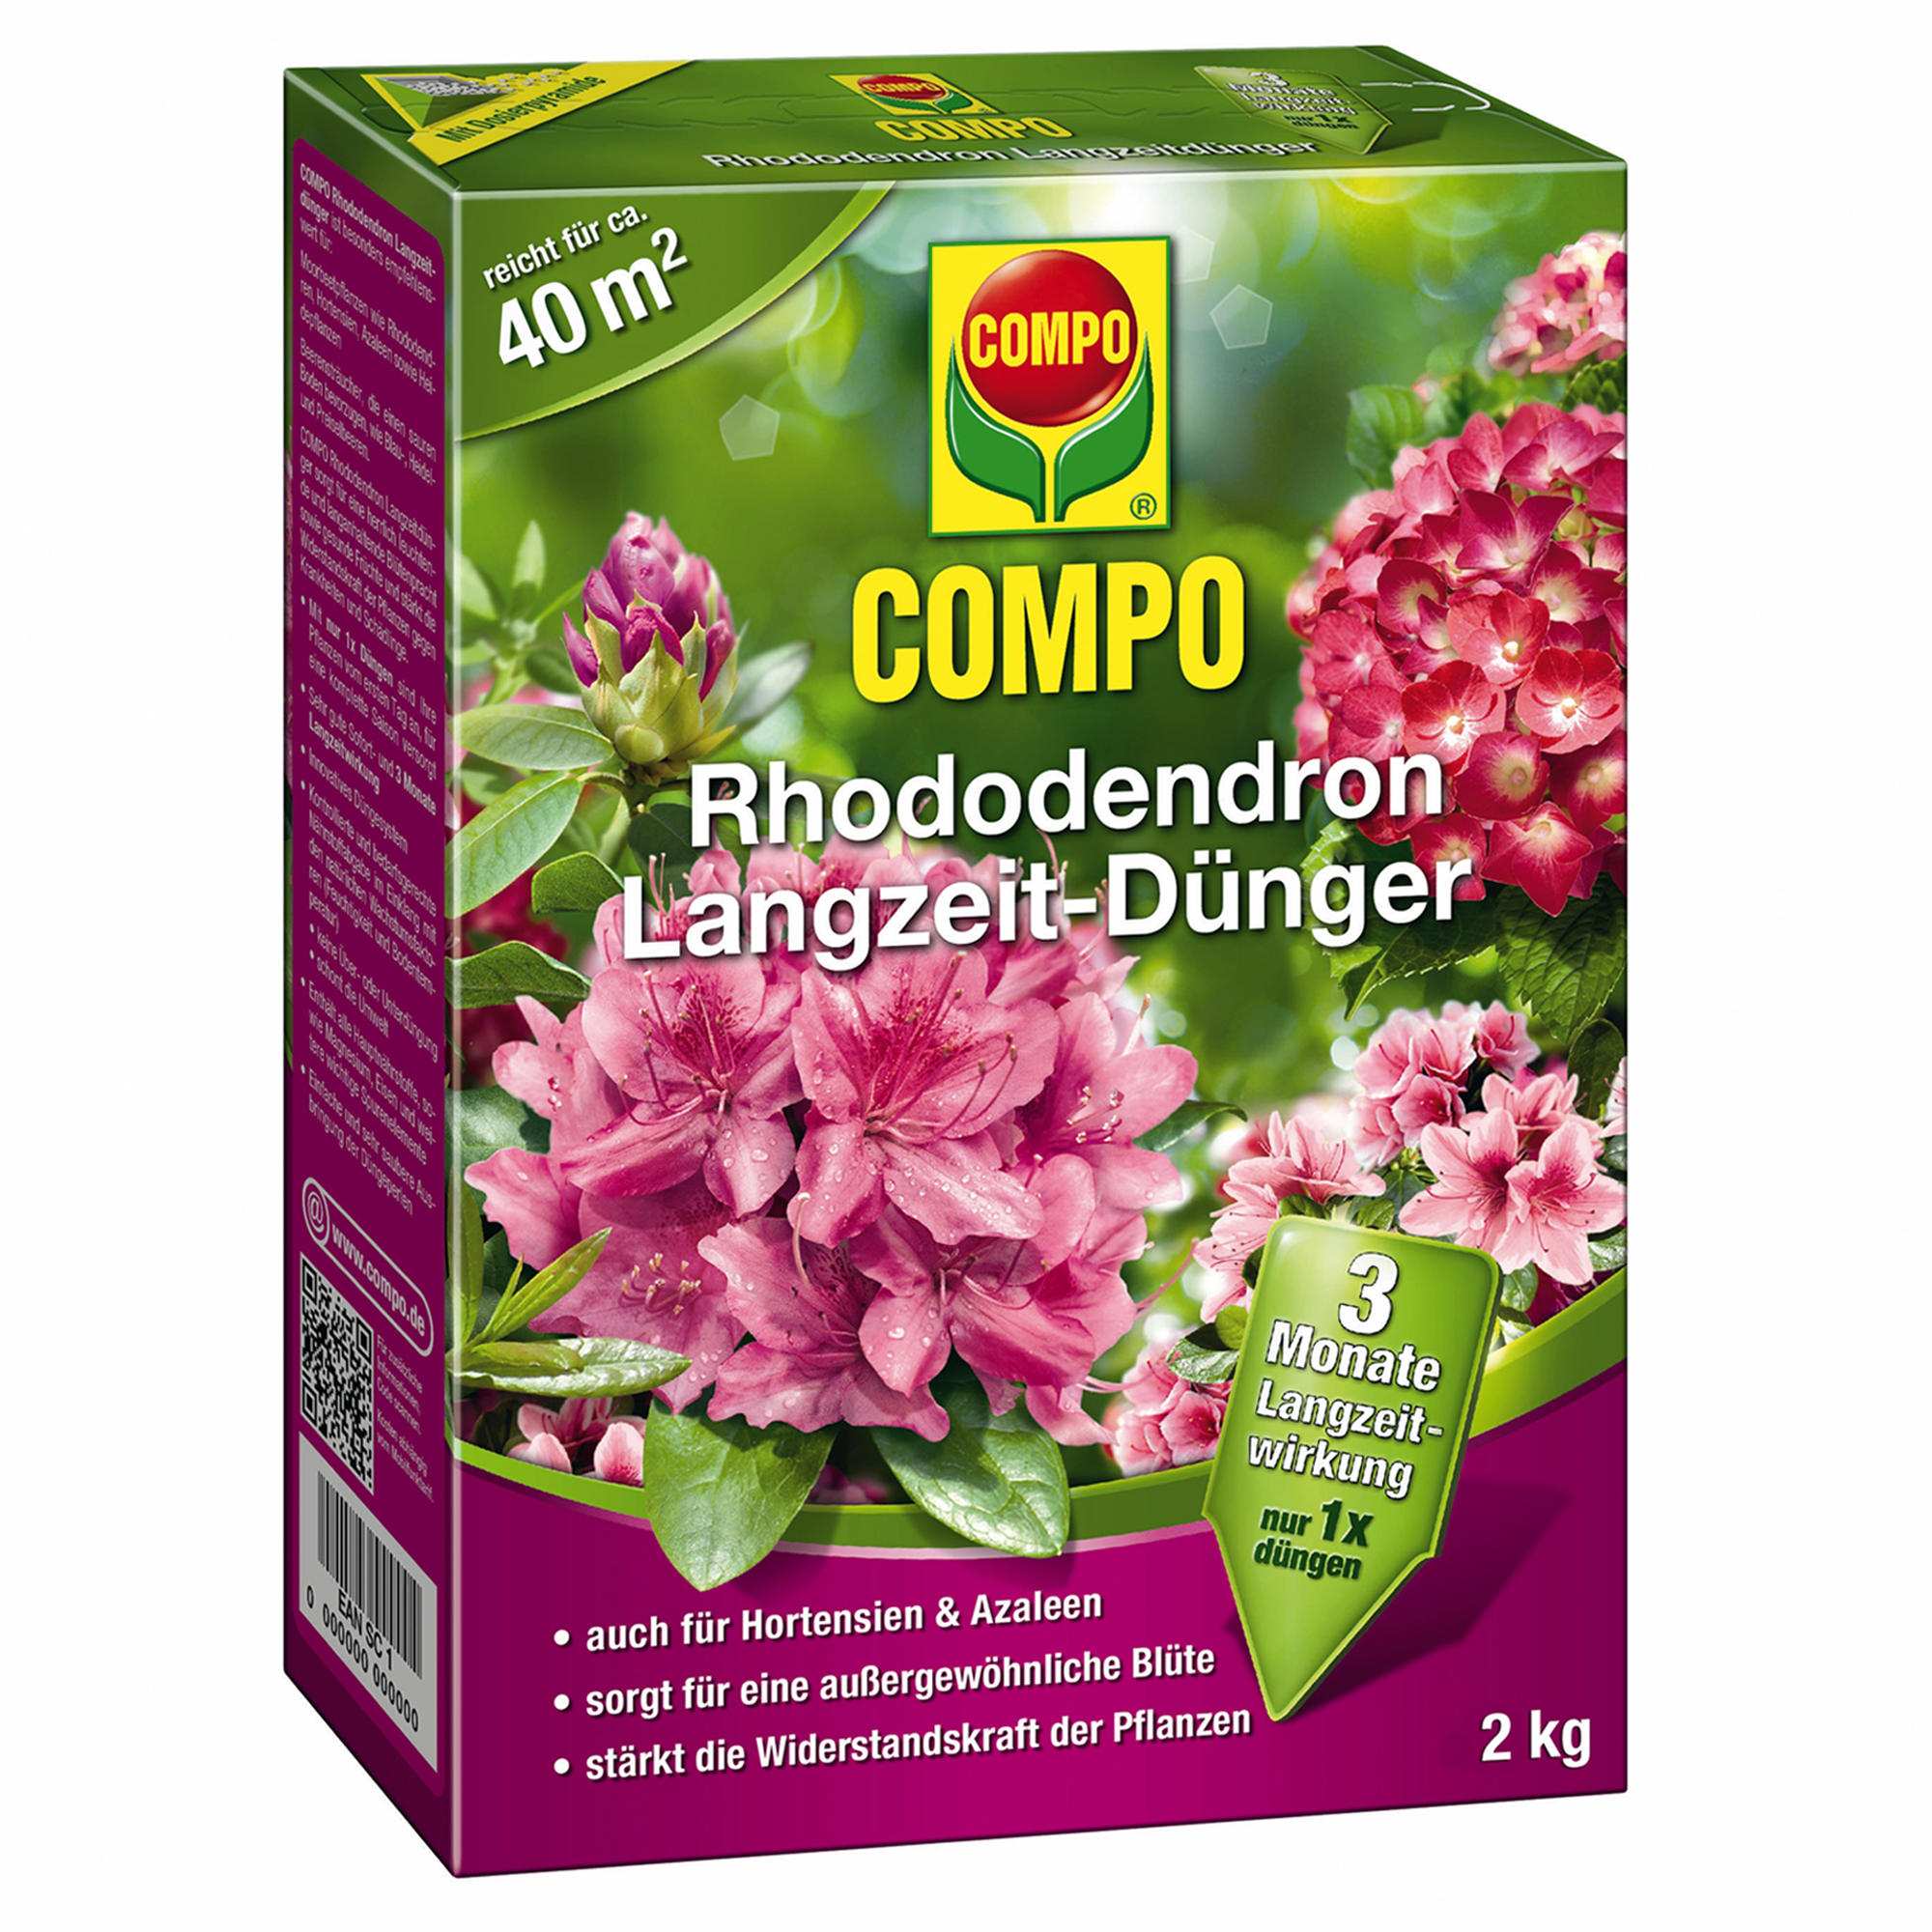 Rhododendron-Langzeitdünger 2 kg + product picture